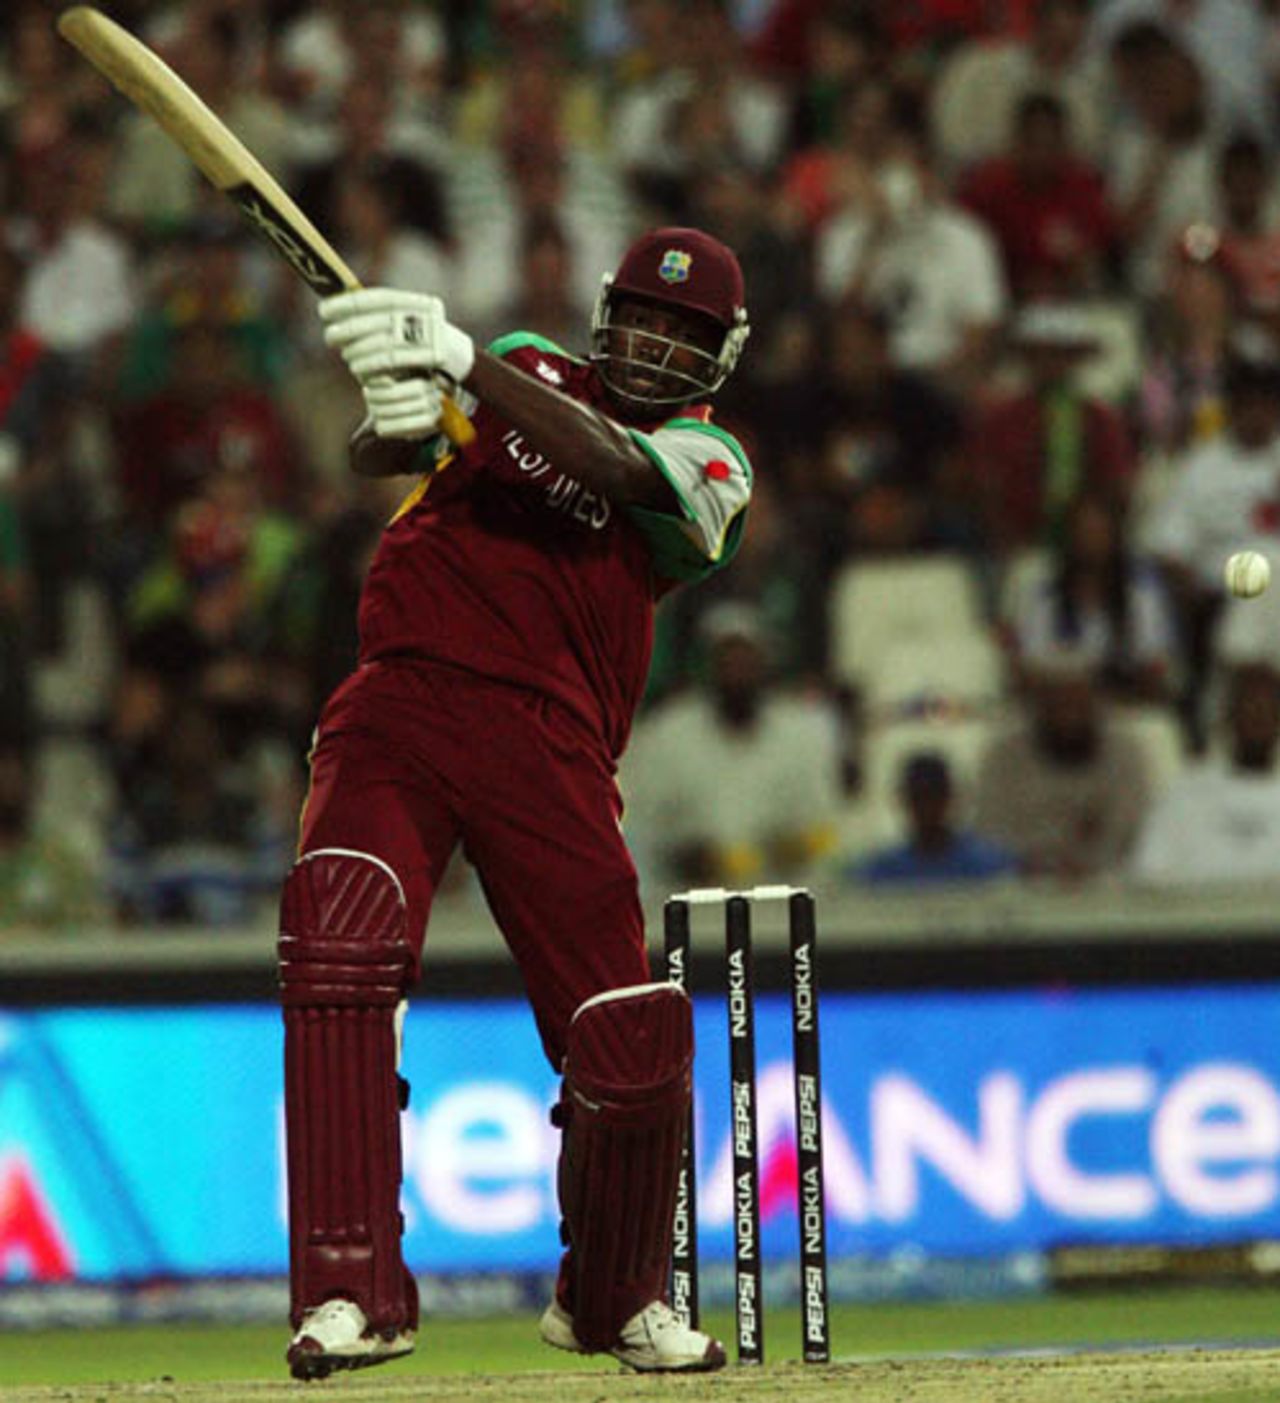 Chris Gayle blasts one through the off side during his hundred, South Africa v West Indies , Group A, ICC World Twenty20, Johannesburg, September 11, 2007